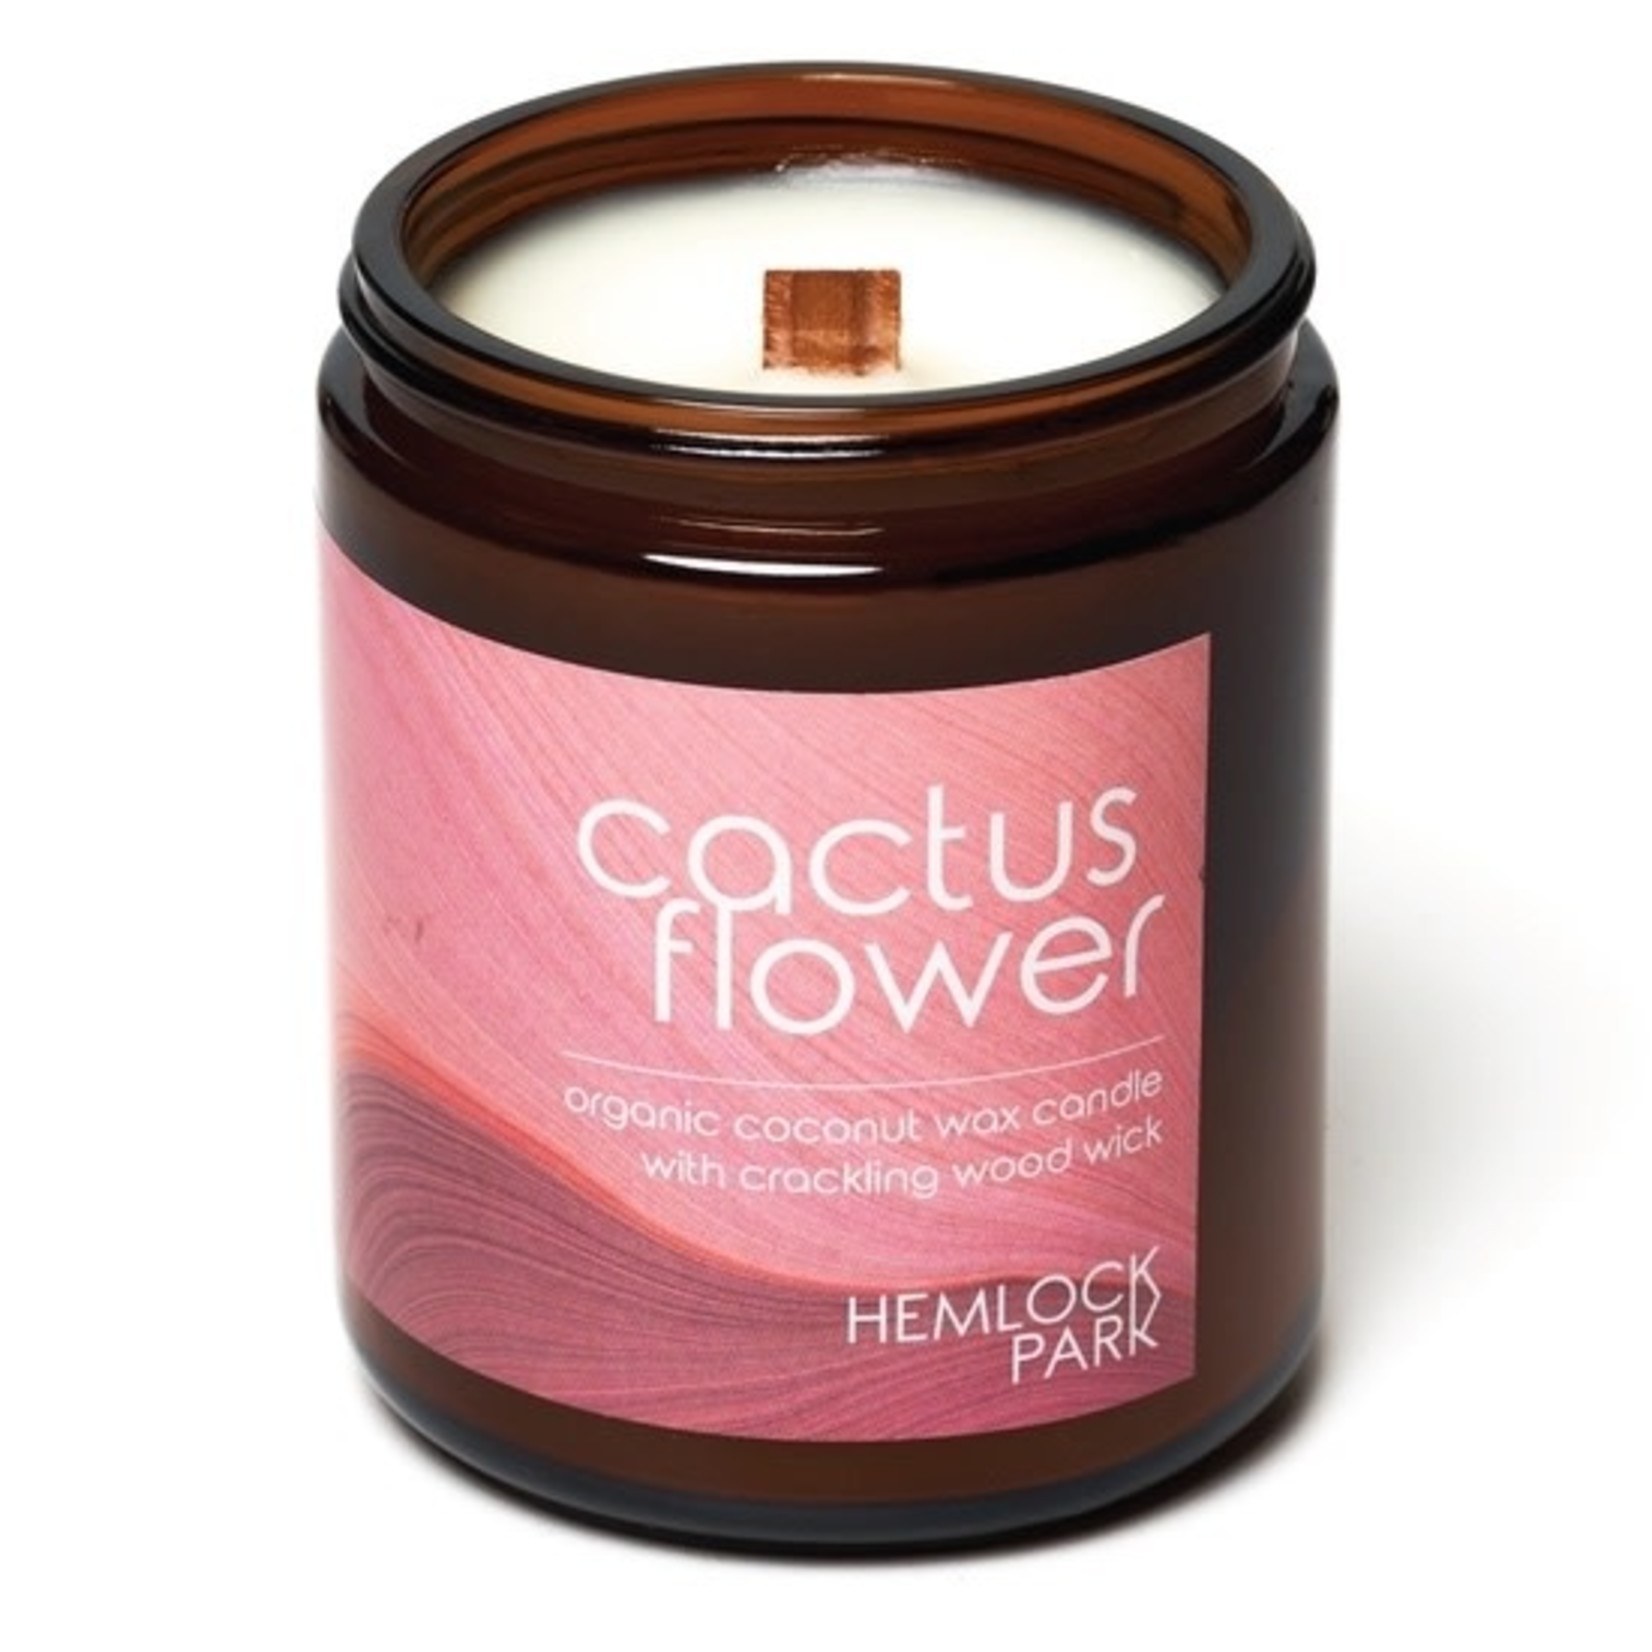 Cactus Flower | Wood Wick Coconut Wax Candle